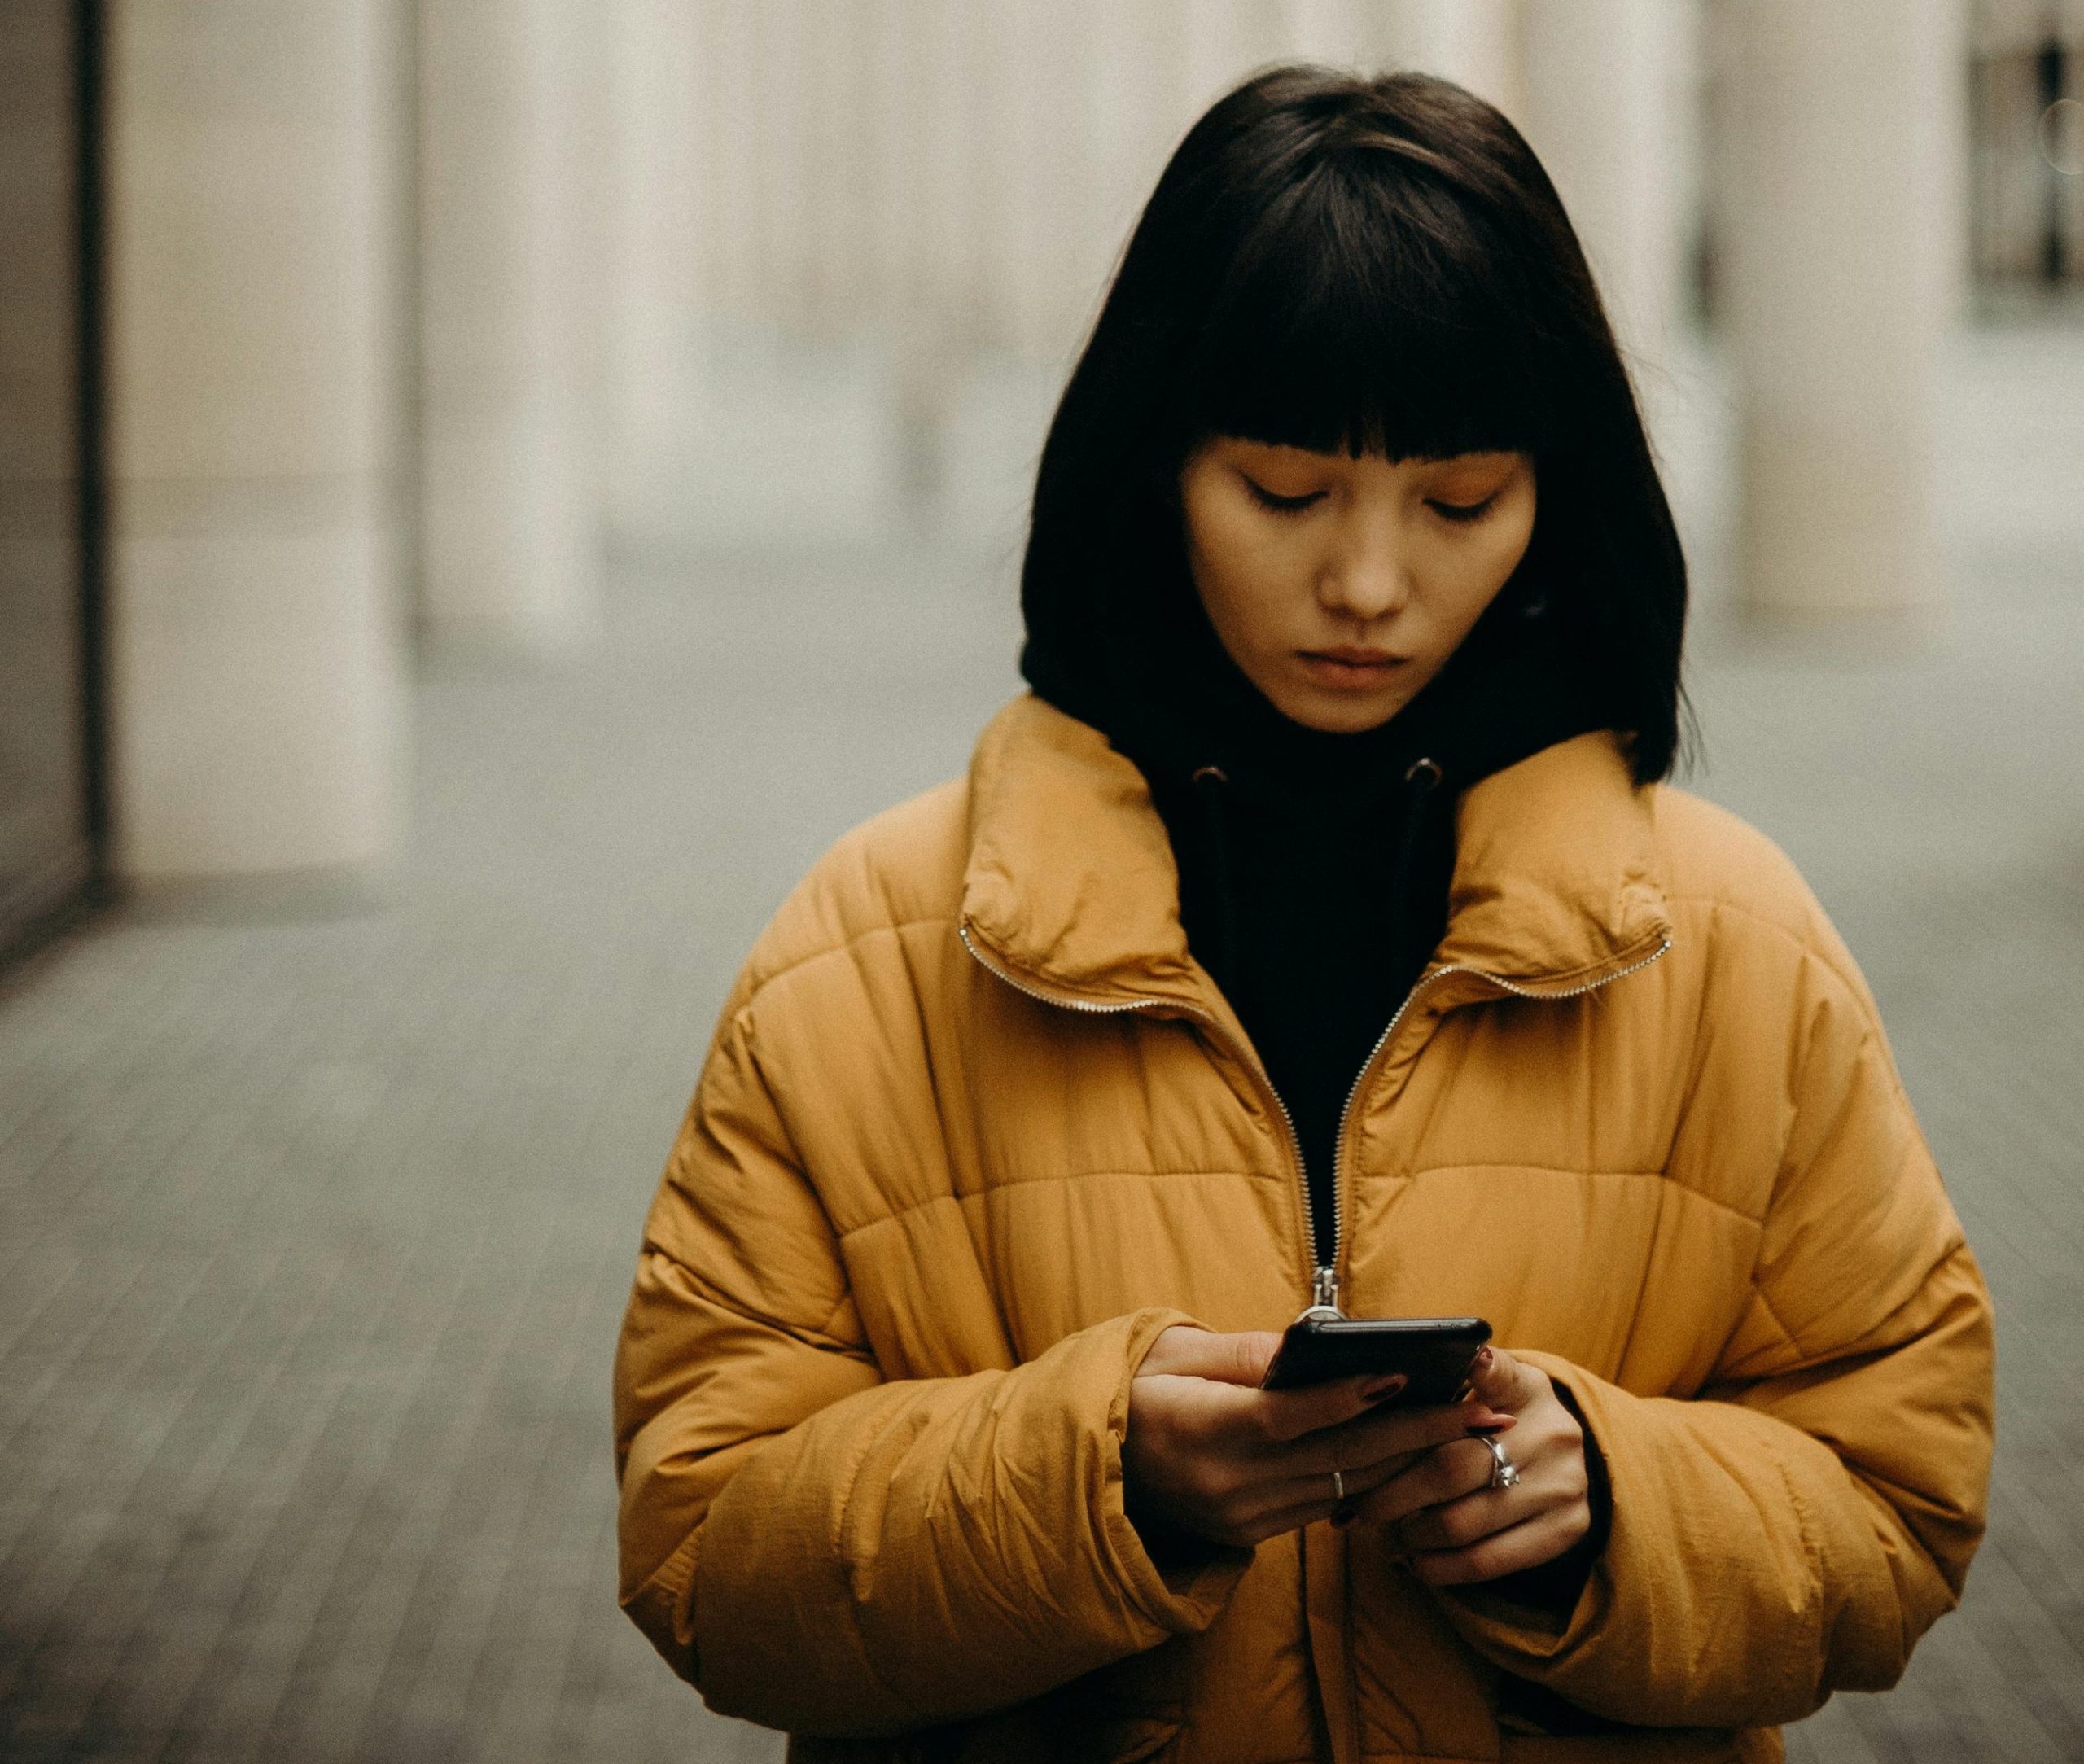 Sad woman in a yellow jacket looking at the screen of her phone.